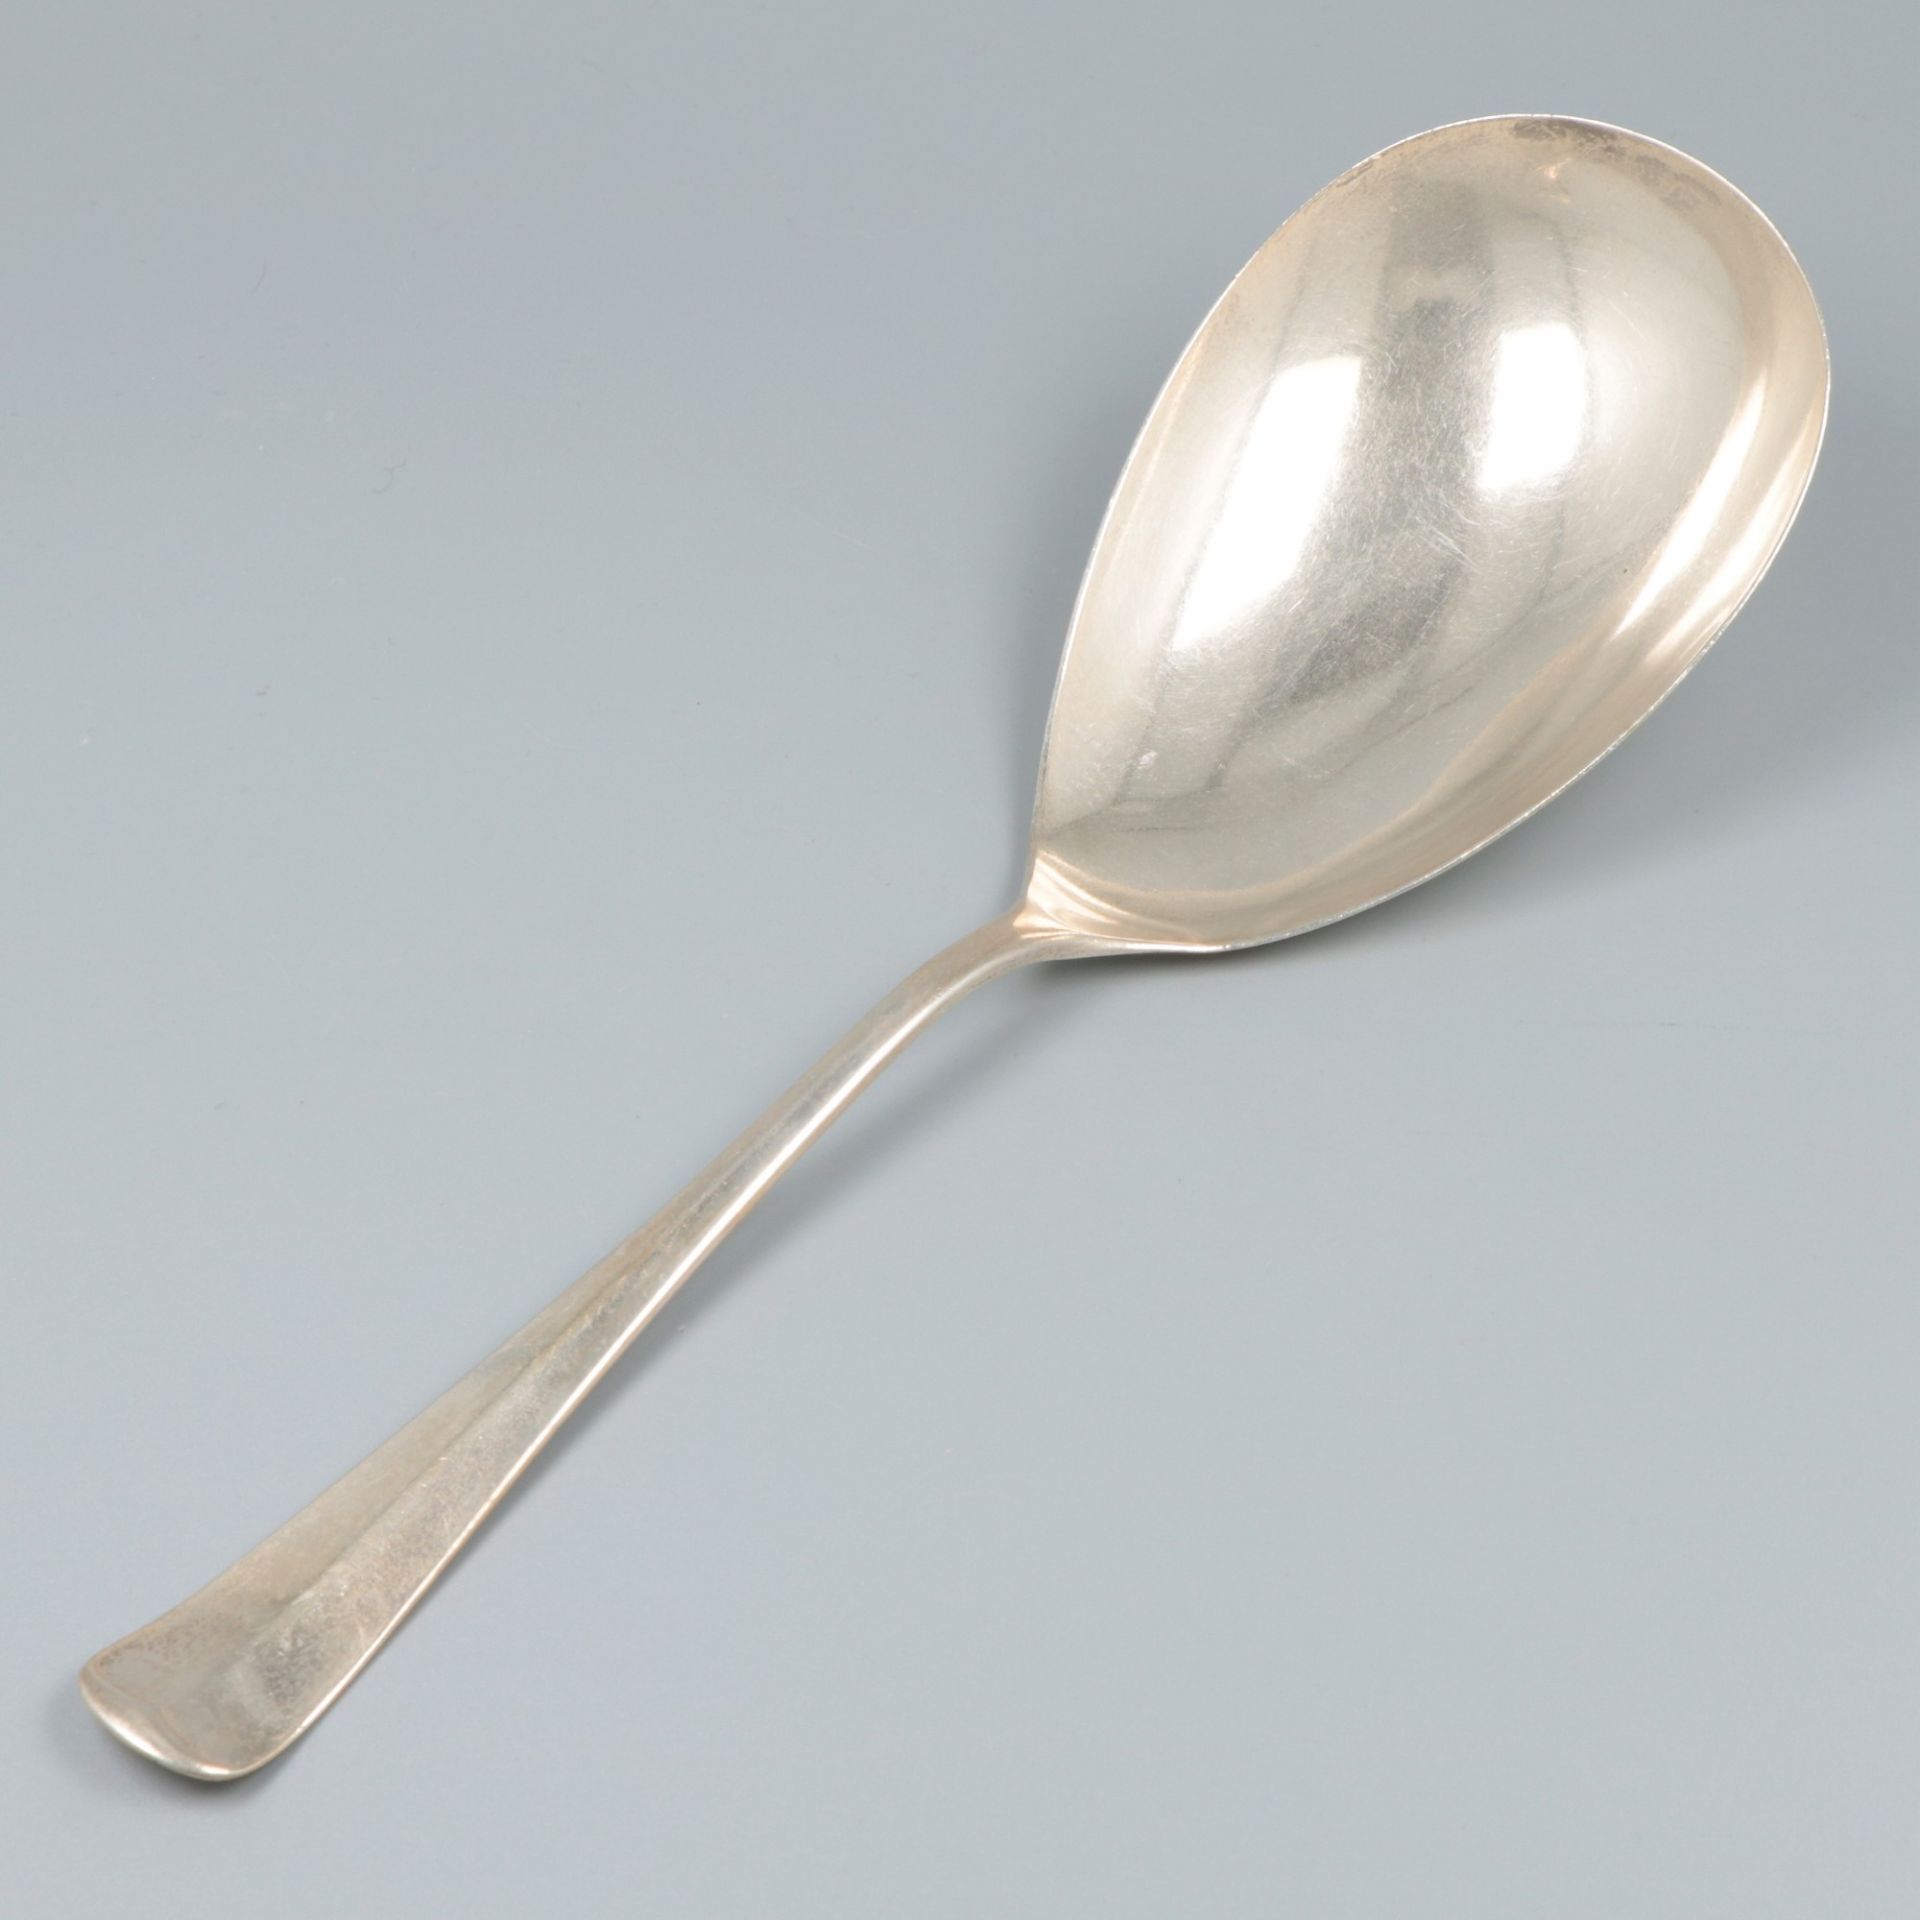 Rice serving spoon "Haags Lofje" silver.